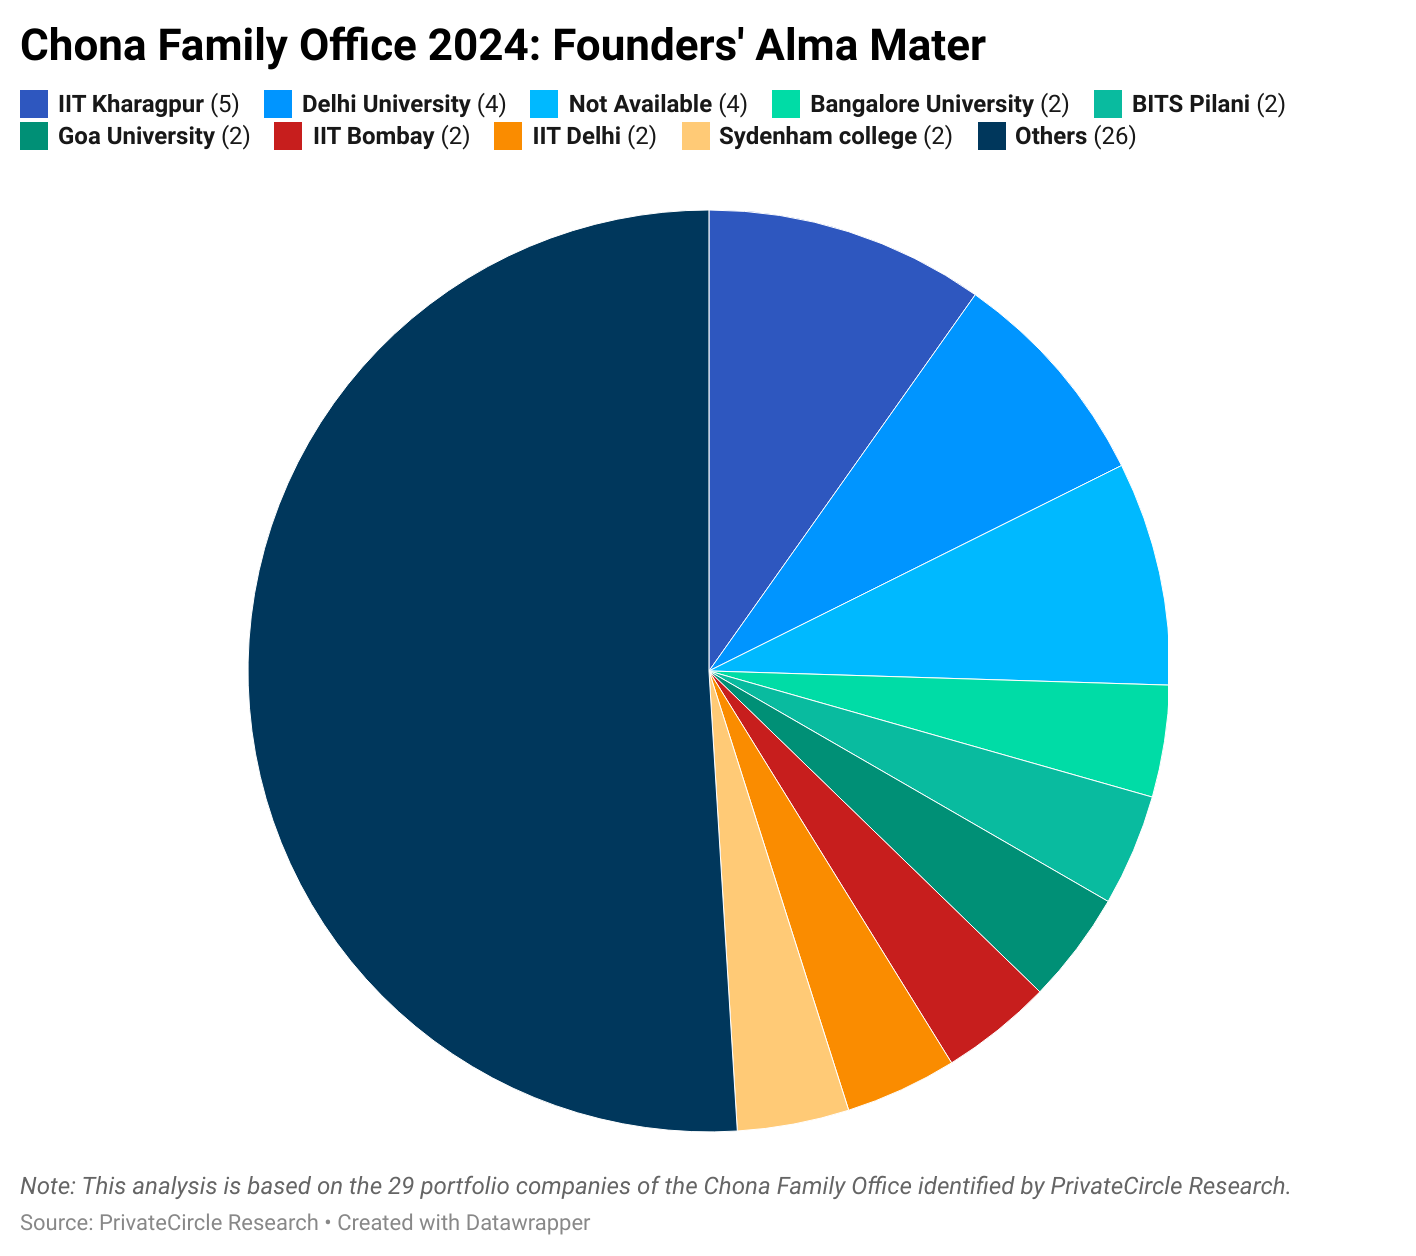 Chona Family Office 2024: Founders' Alma Mater

Majority founders in the Chona Family Office portfolio came from state universities and private institutions. Overall, 12 out of the 52 founders went to Indian Institute of Technology, contradicting the popular narrative that Indian investors prefer IITian-led startups.